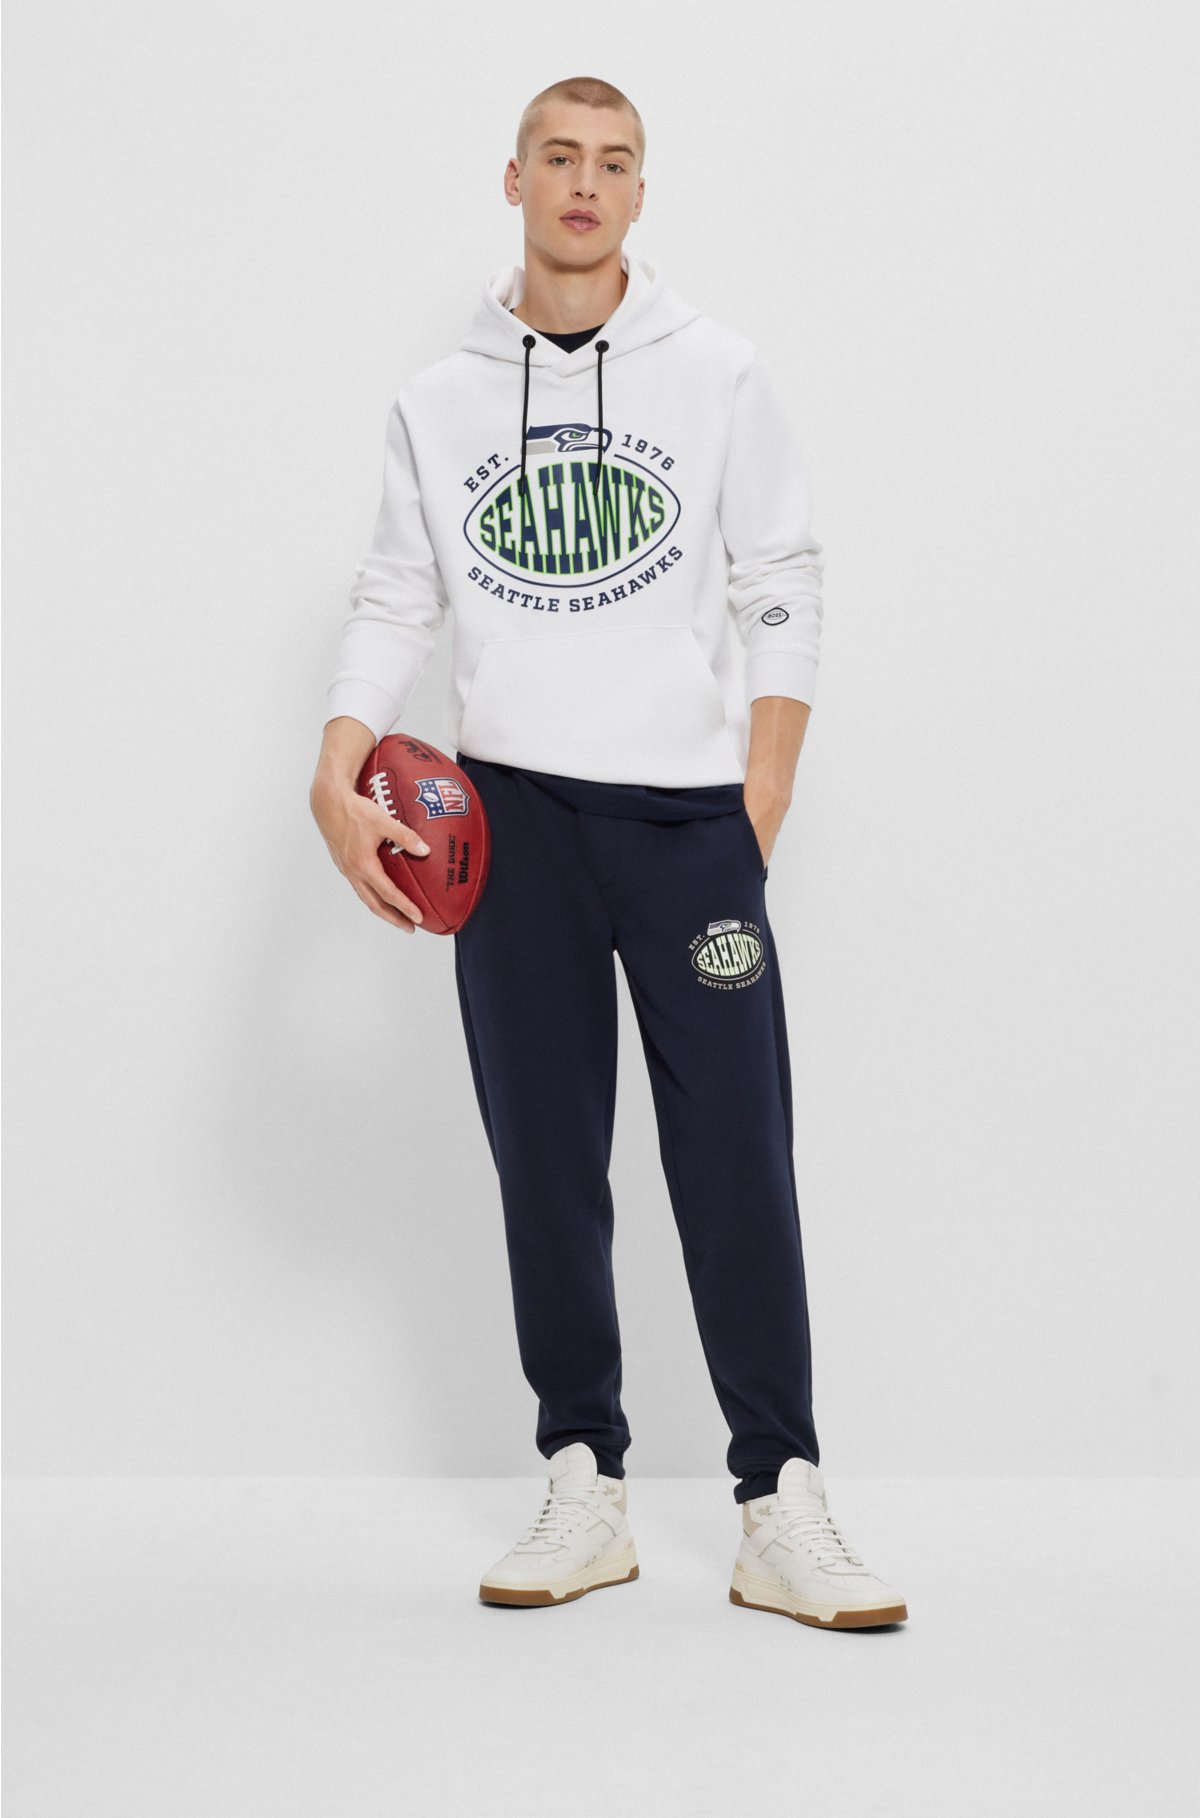  BOSS x NFL cotton-blend hoodie with collaborative branding, Seahawks